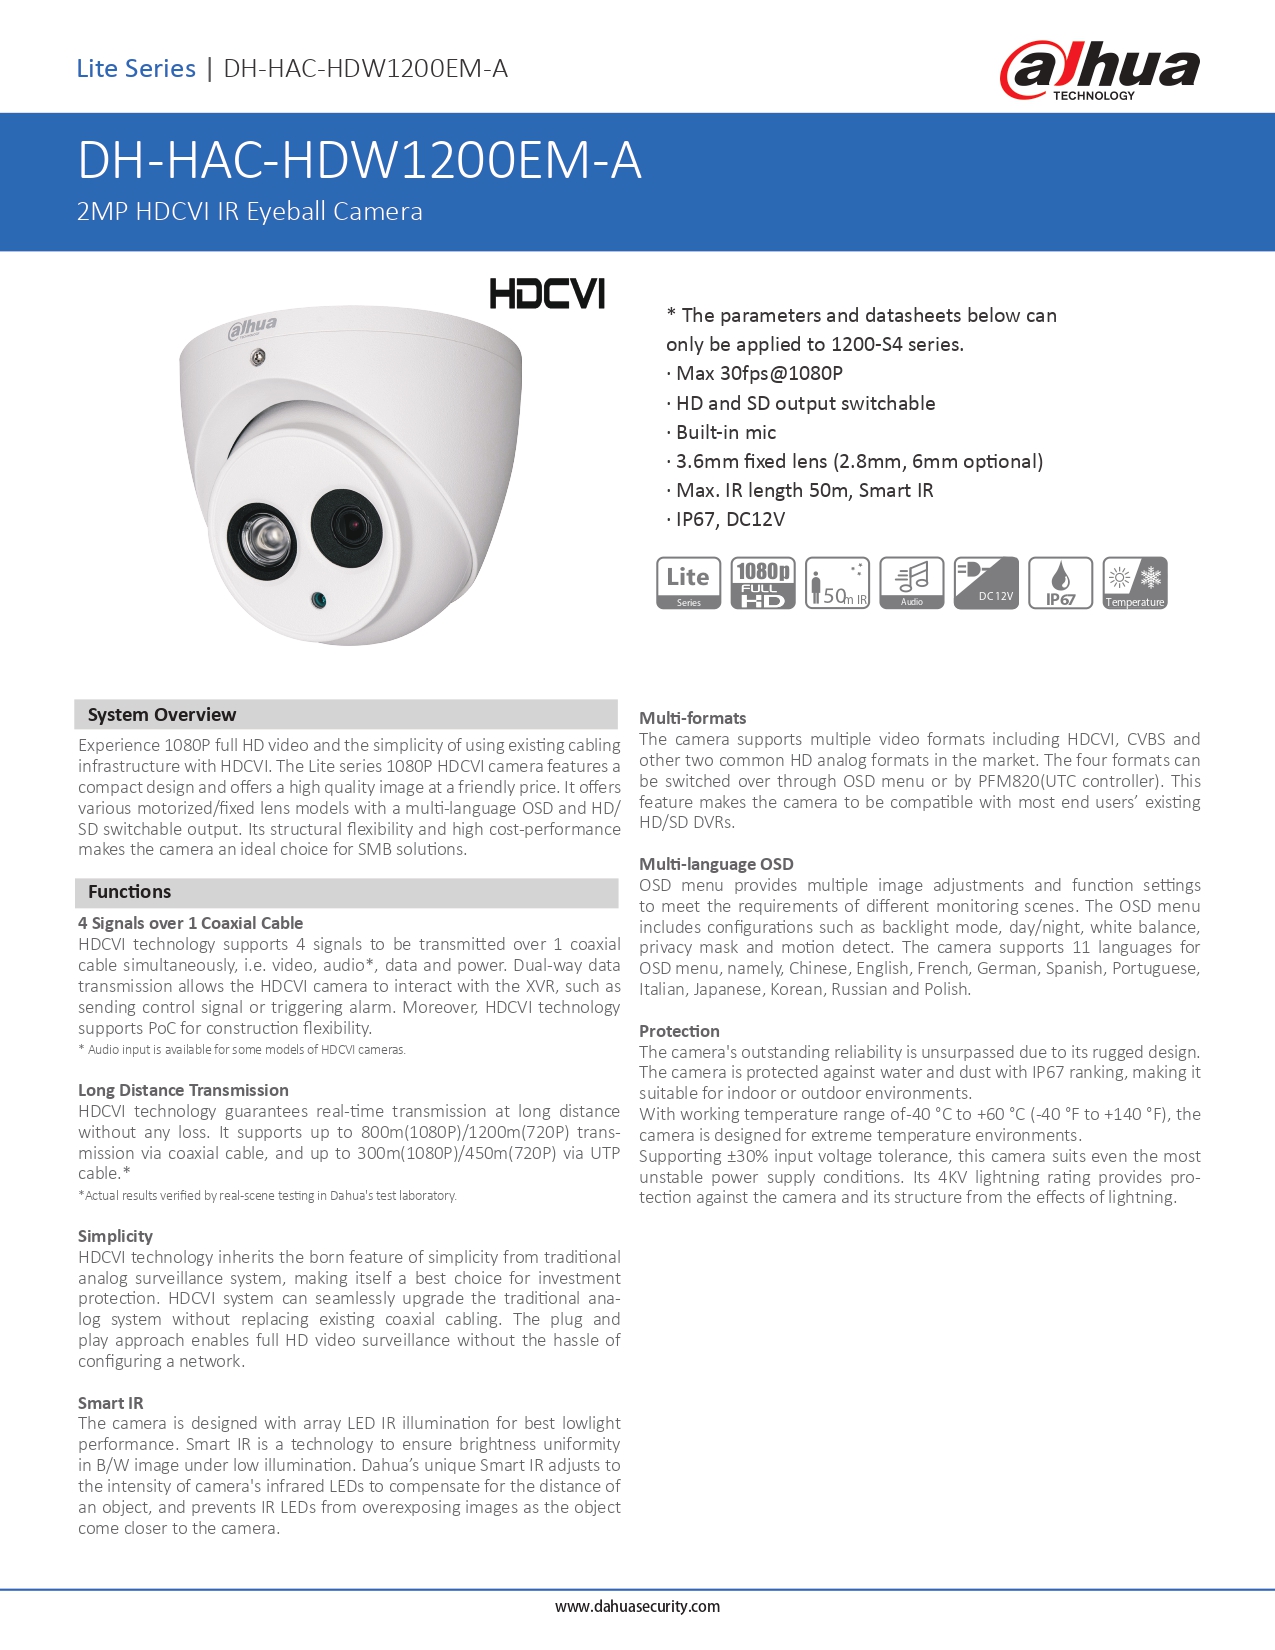 Dahua DH-HAC-HDW1200EM-A HD CCTV Camera Solution – 4 CAM Package | IR Night Vision | with Installation | Full HD 1080 | 24Hrs Recording